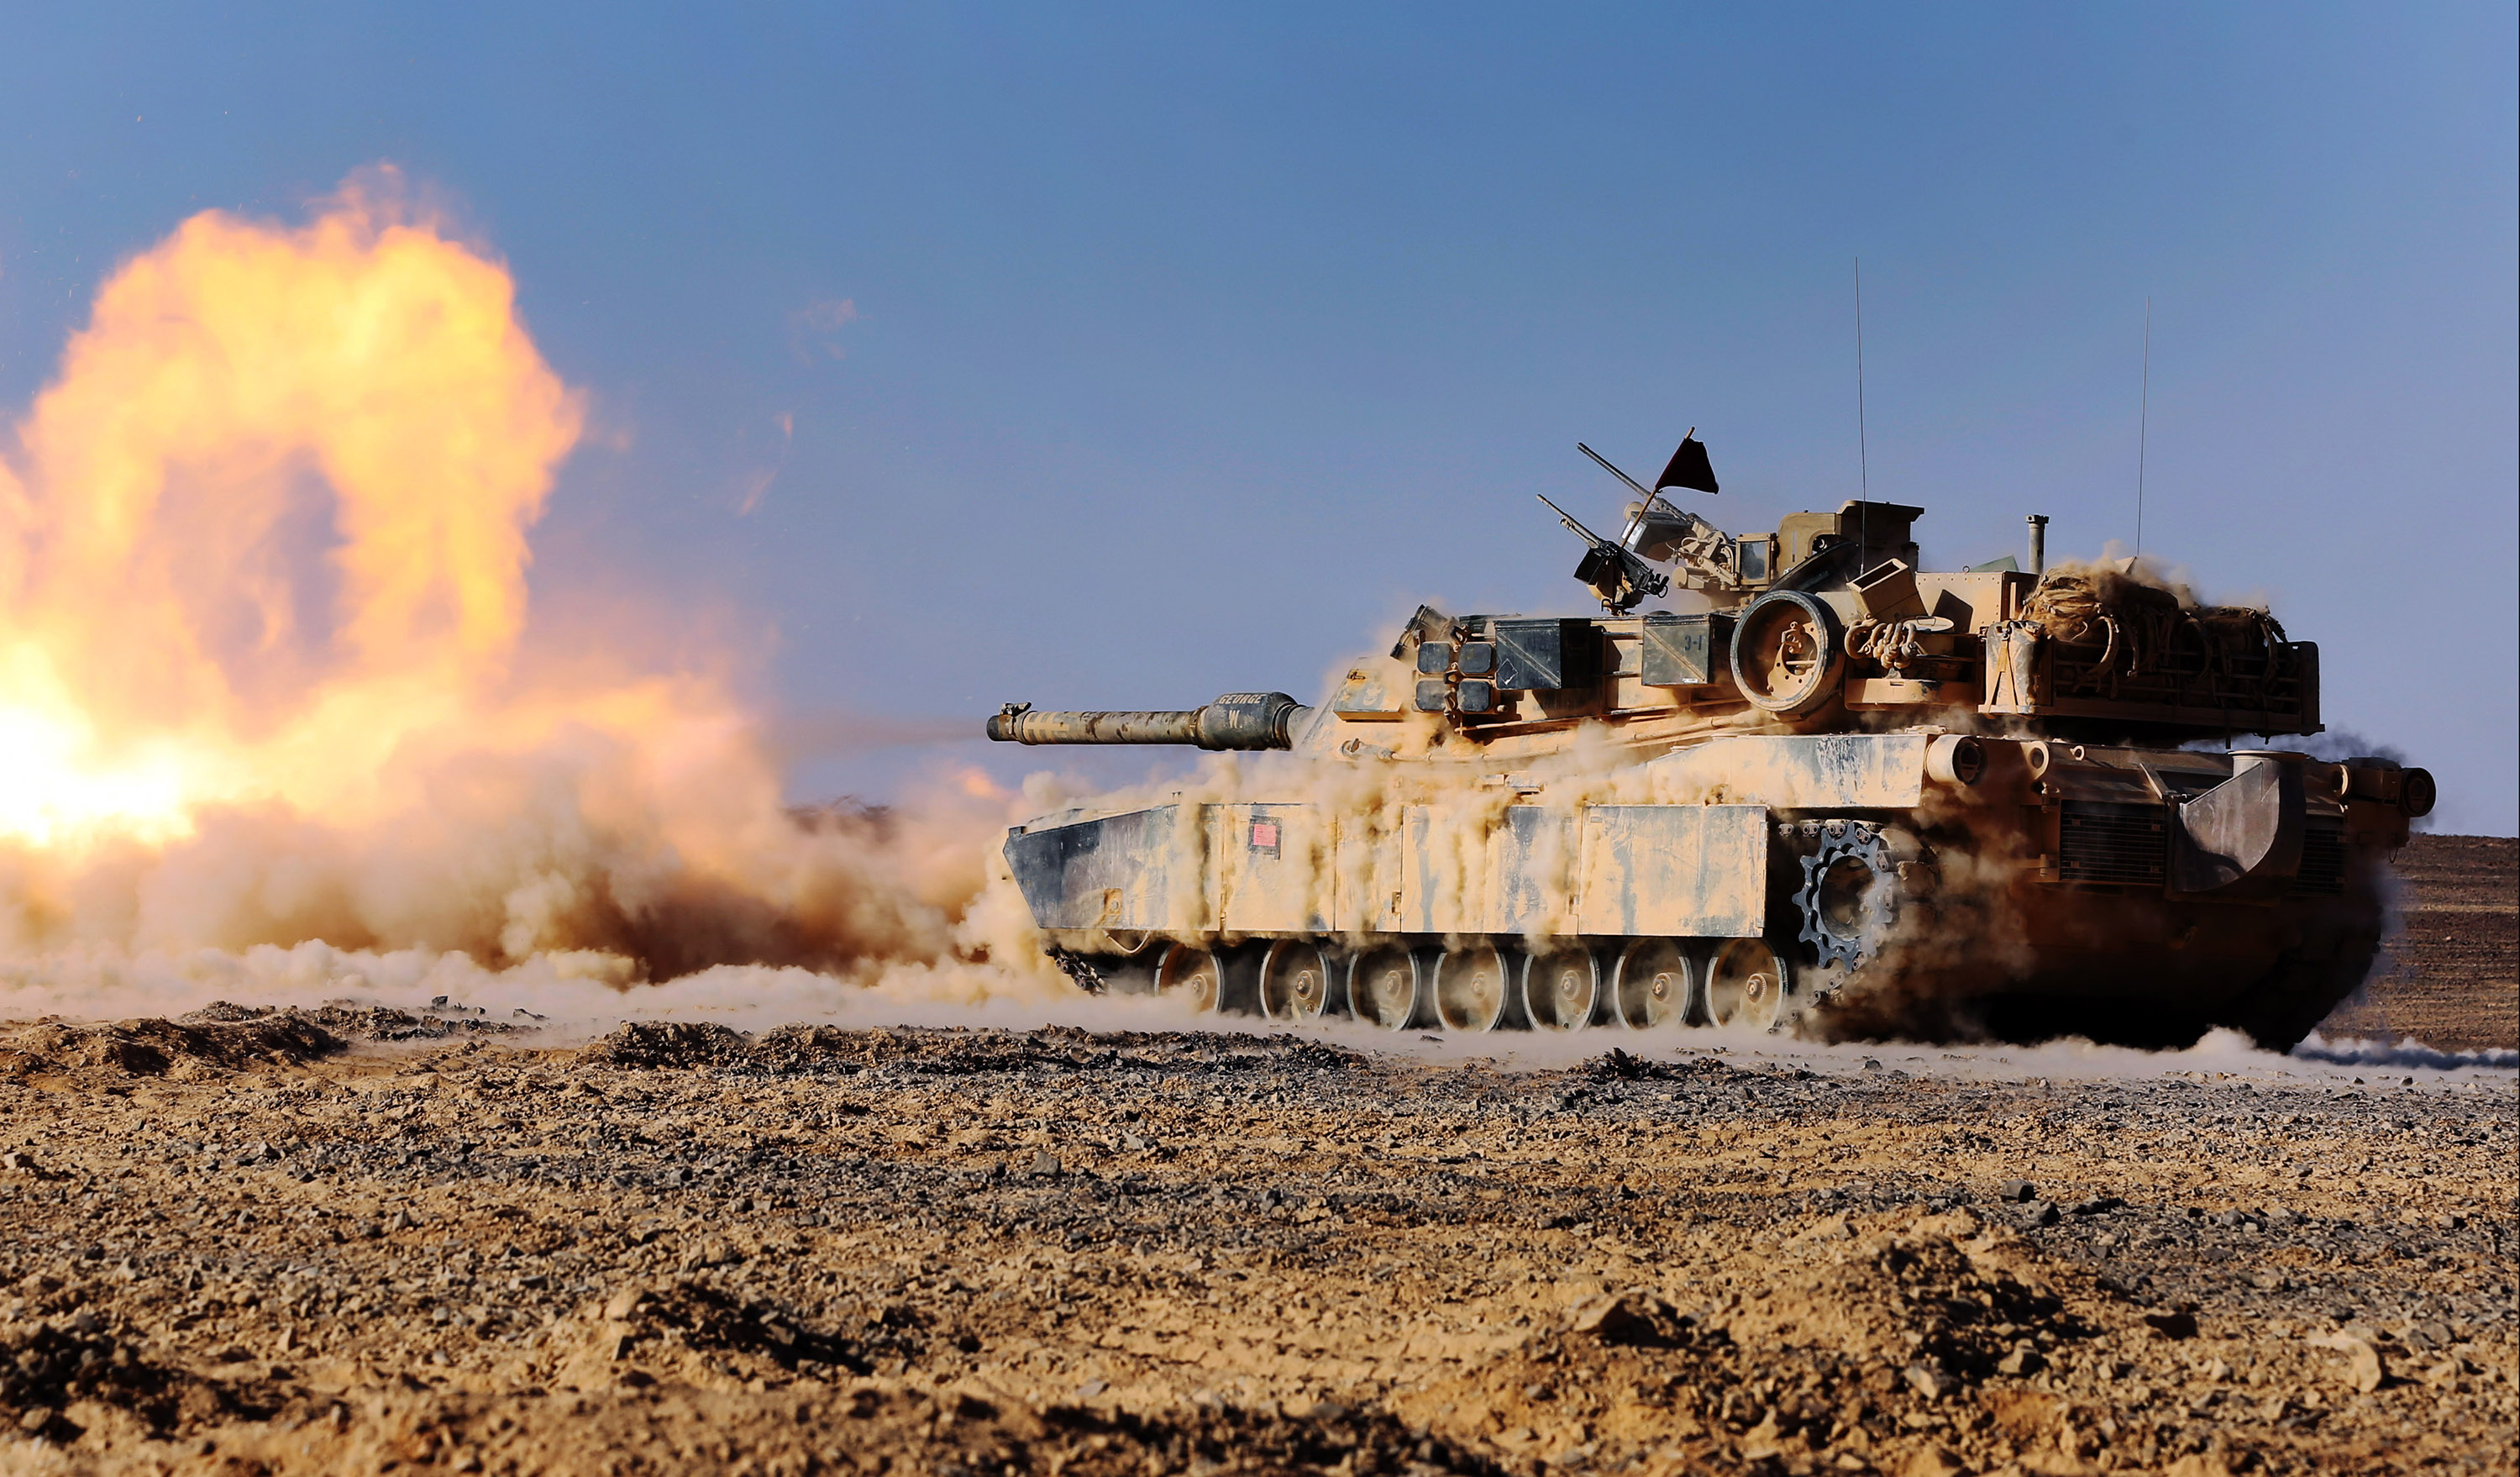 The U.S. Army Is Finally Getting a New Tank (Sort Of). The National Interest